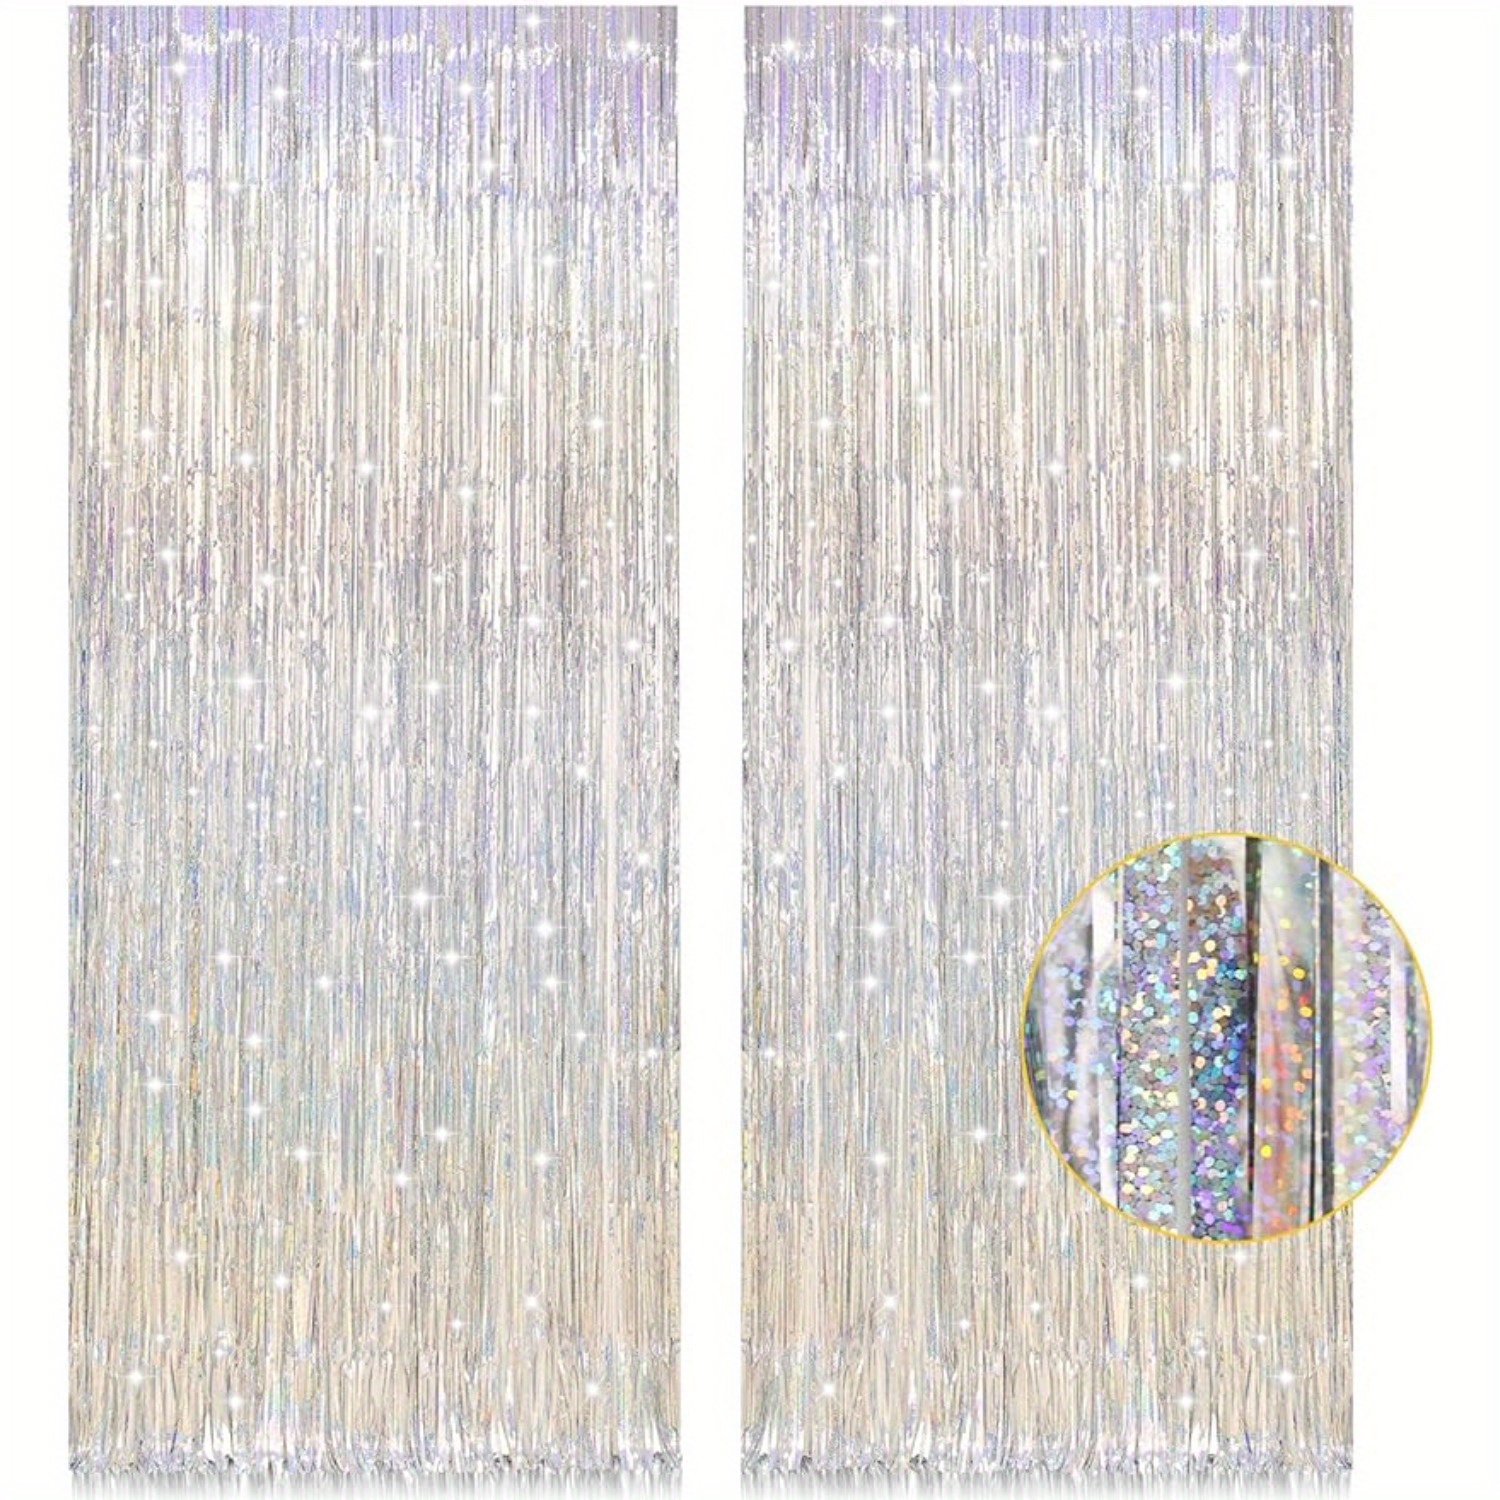  Purple Streamers Foil Fringe Curtain 3.3 x 8.3ft Party Streamers  2Pack Metallic Streamer Curtains Mermaid Birthday Themed Party Decorations  Tinsel Curtain for Parties Streamers for Photoshoot Decor : Home & Kitchen